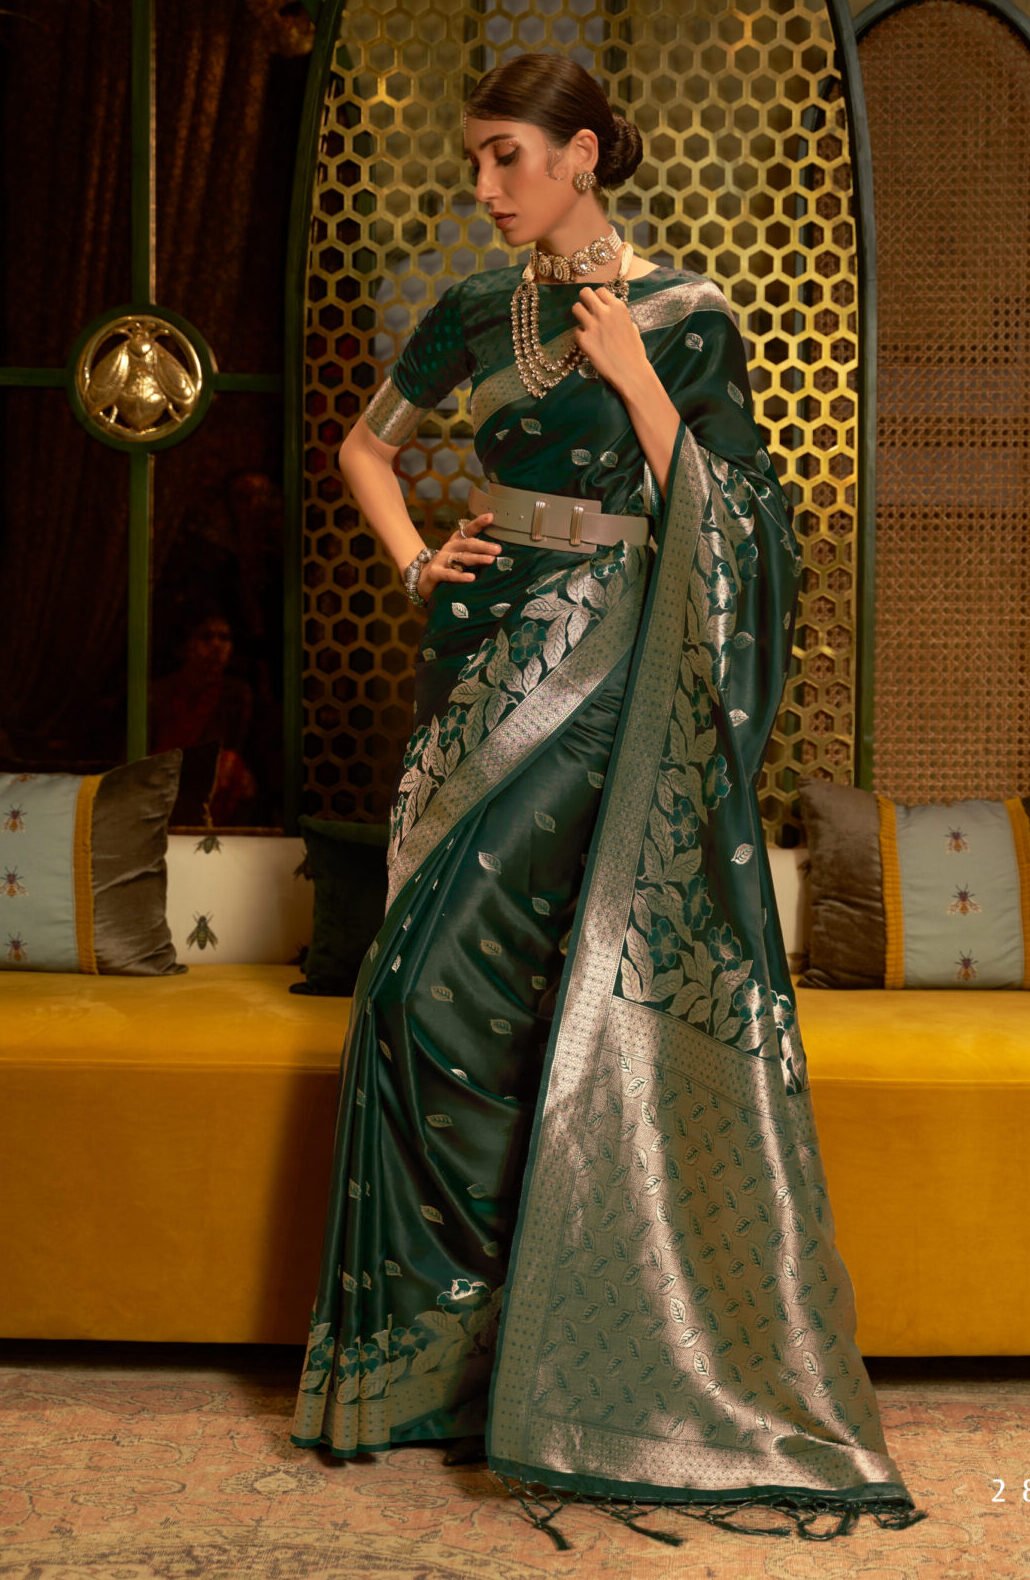 Buy Bridal Green Sarees Online Shopping in India for Wedding | SALE – Sunasa